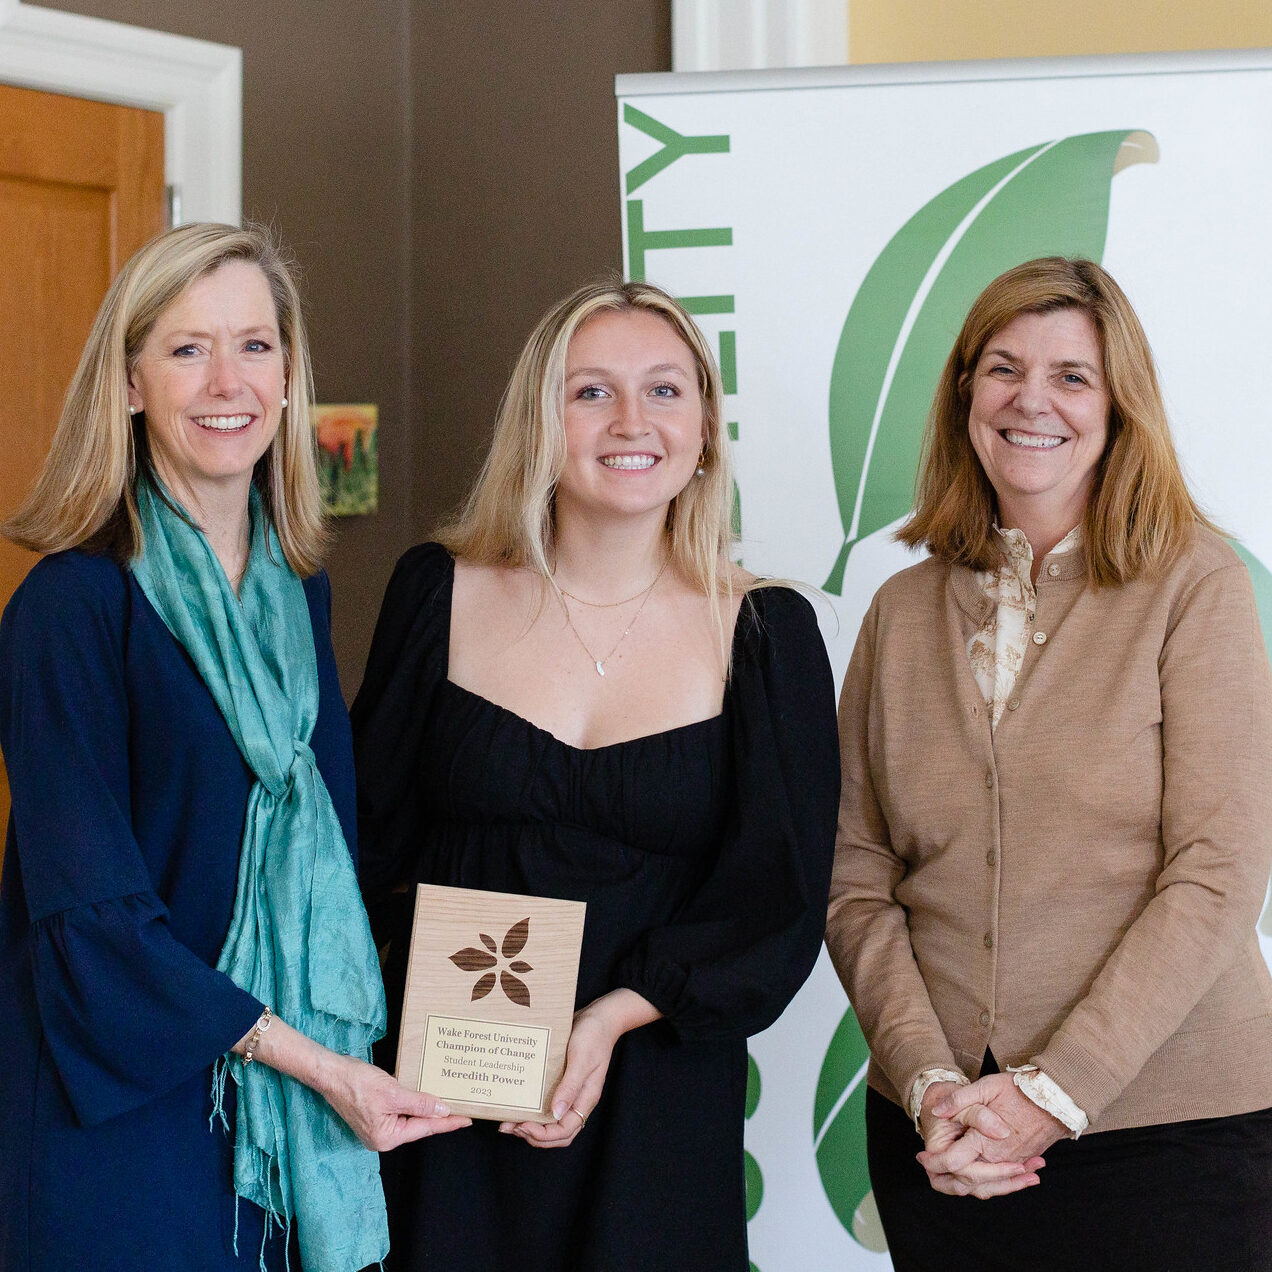 Dedee DeLongpré Johston, Meredith Power, and Michele Gillespie at the 2023 Champions of Change Campus Sustainability Awards